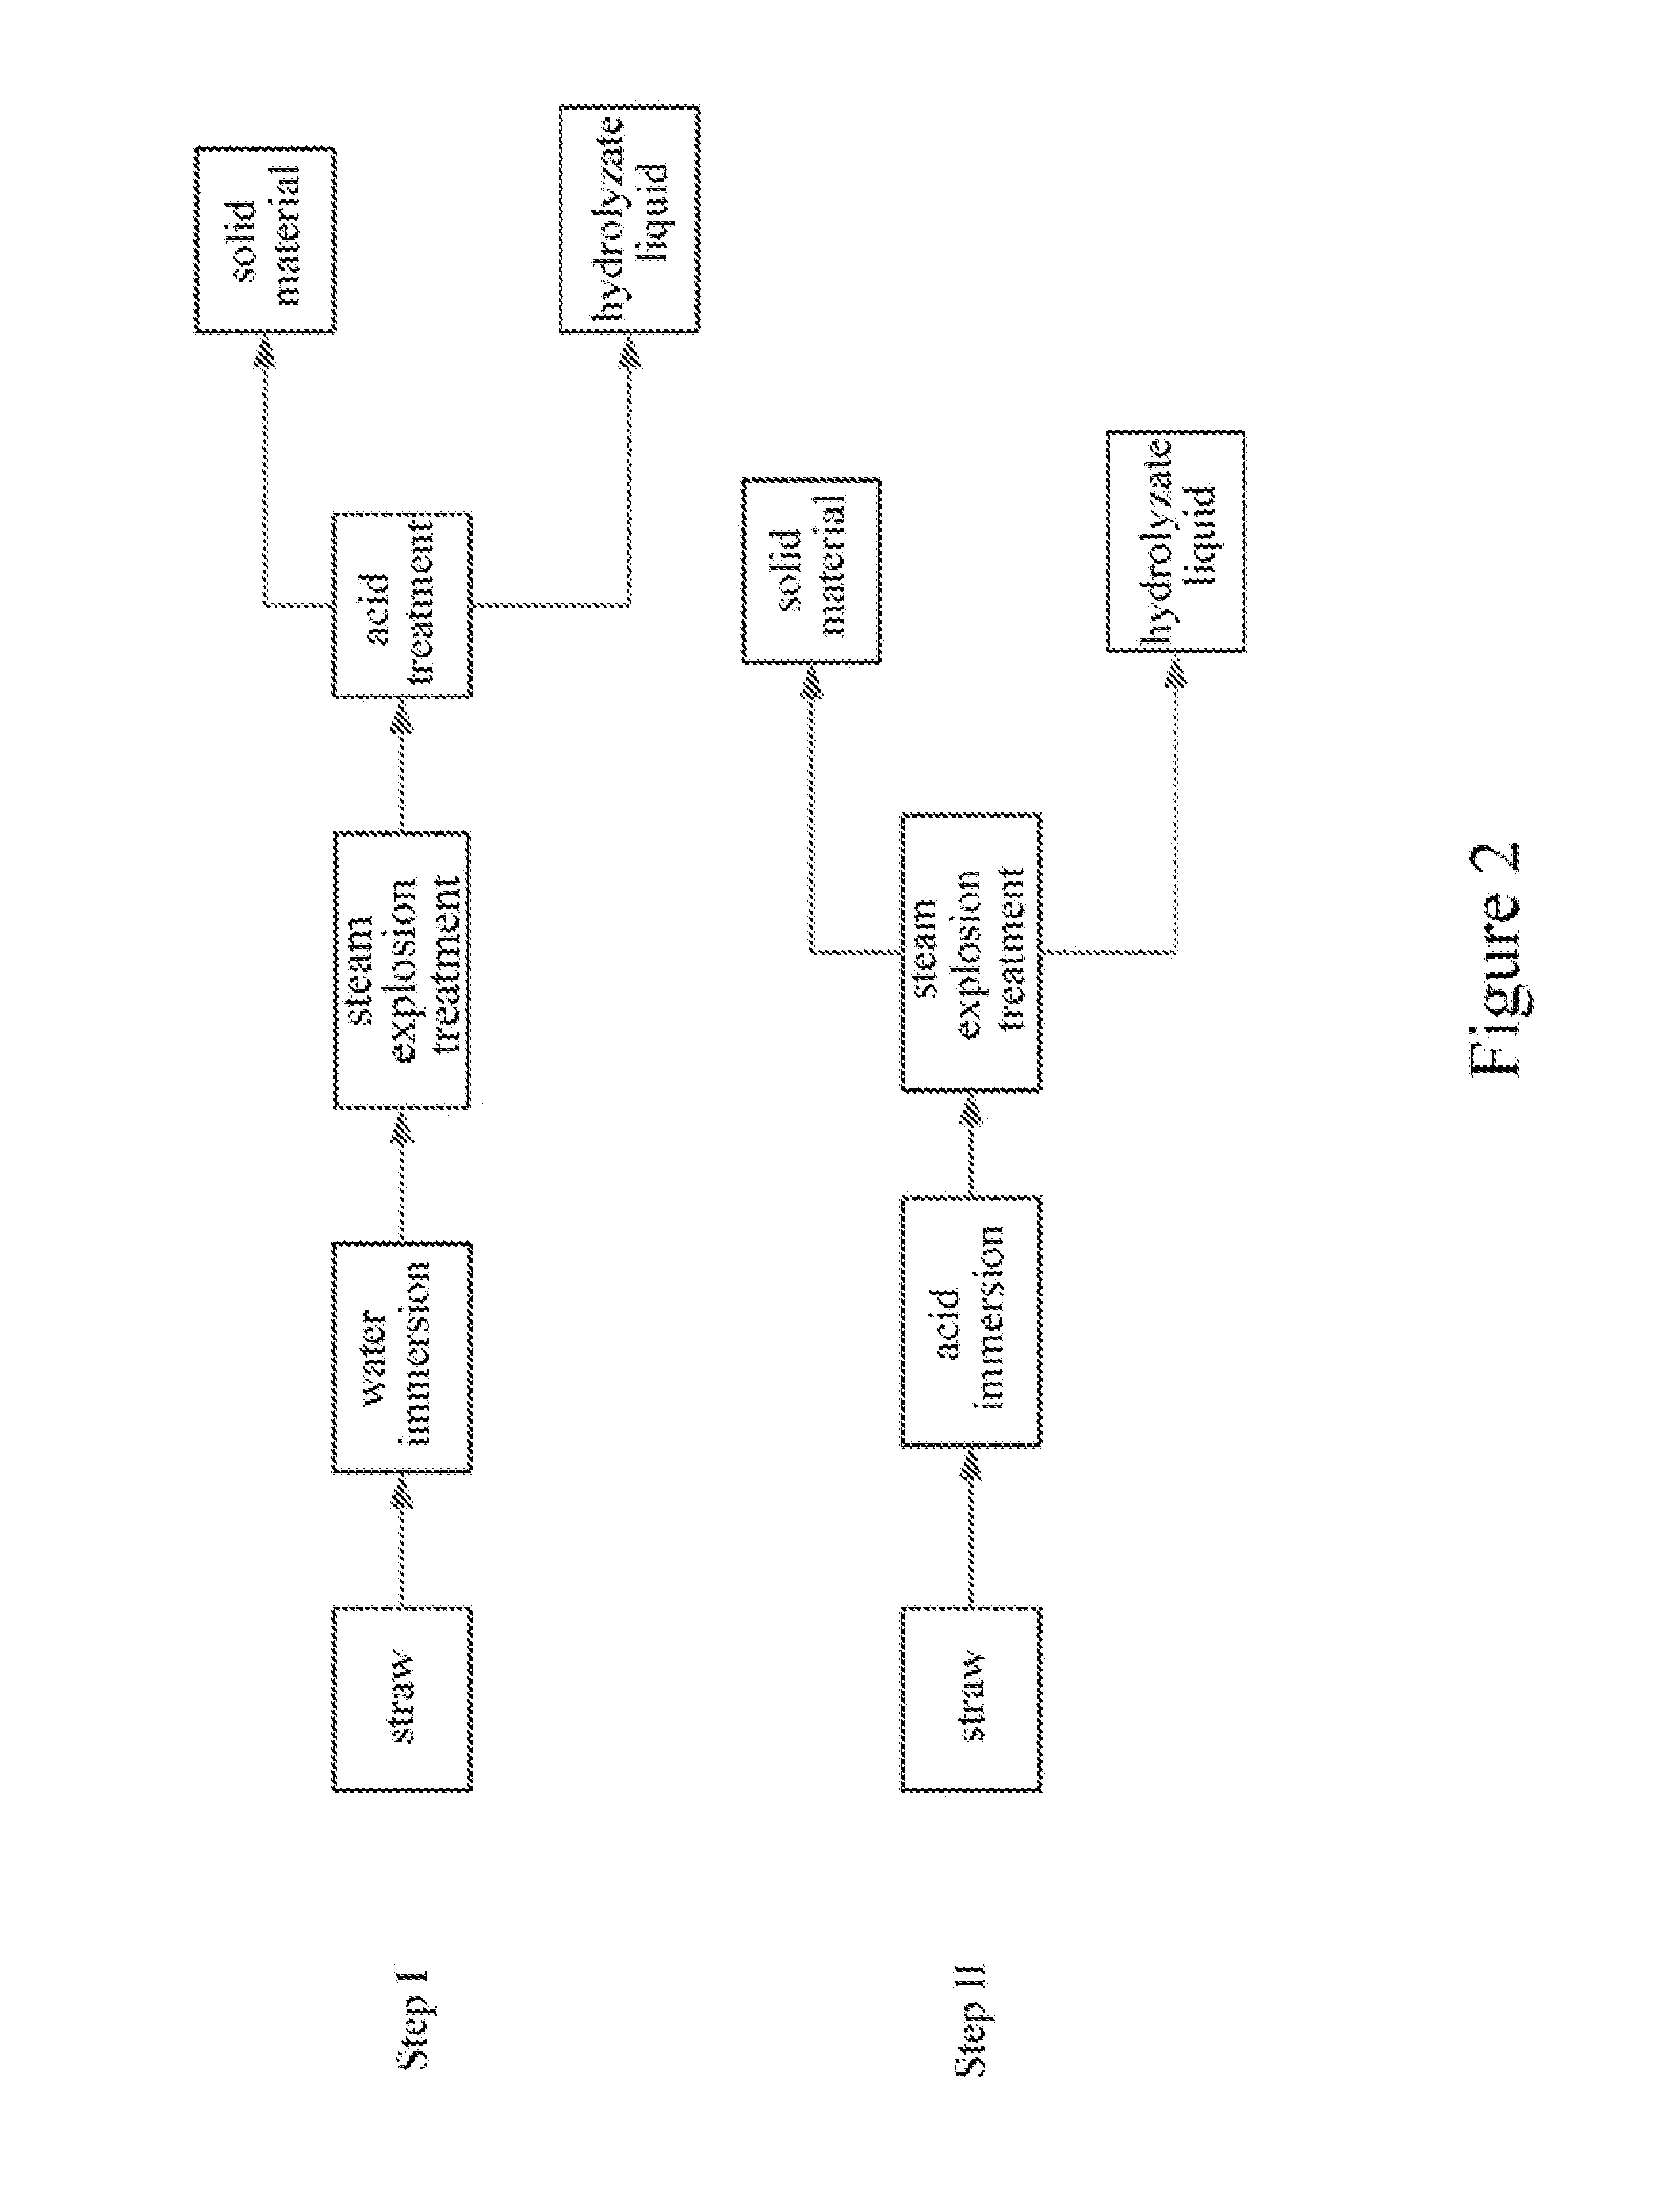 Process for producing bio-based product from straw hemicellulose and fully utilizing the components thereof